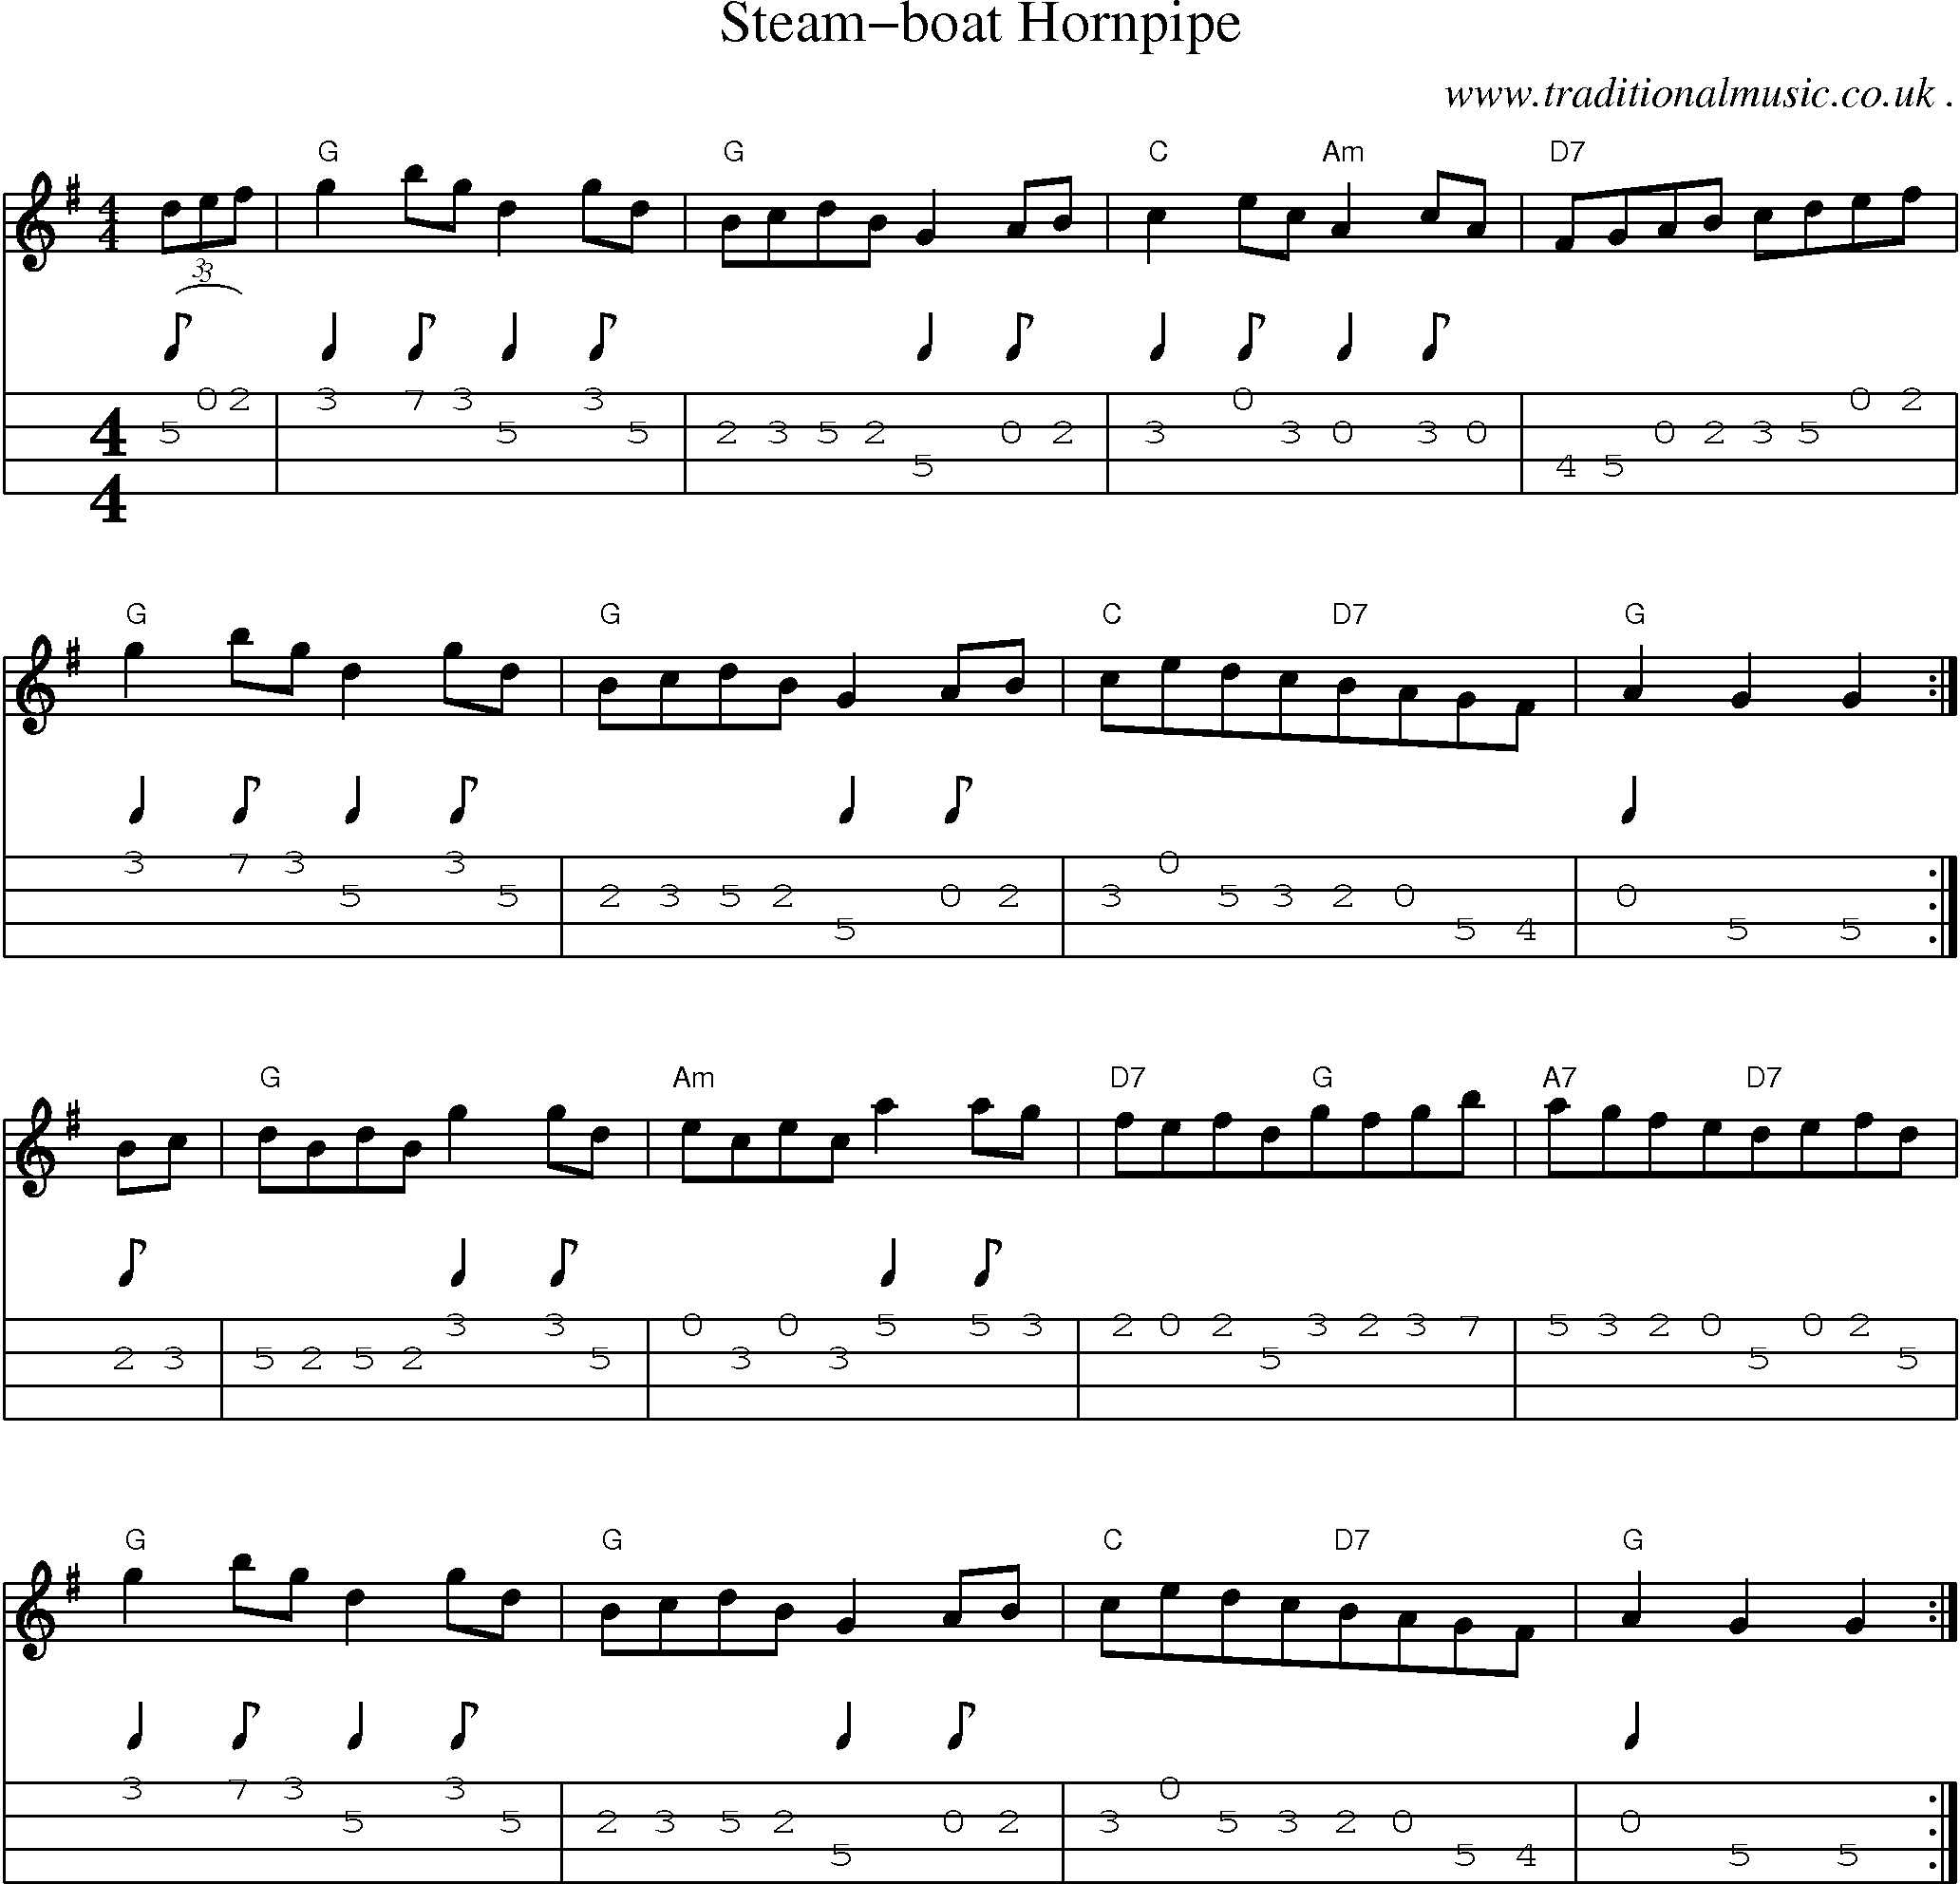 Sheet-Music and Mandolin Tabs for Steam-boat Hornpipe